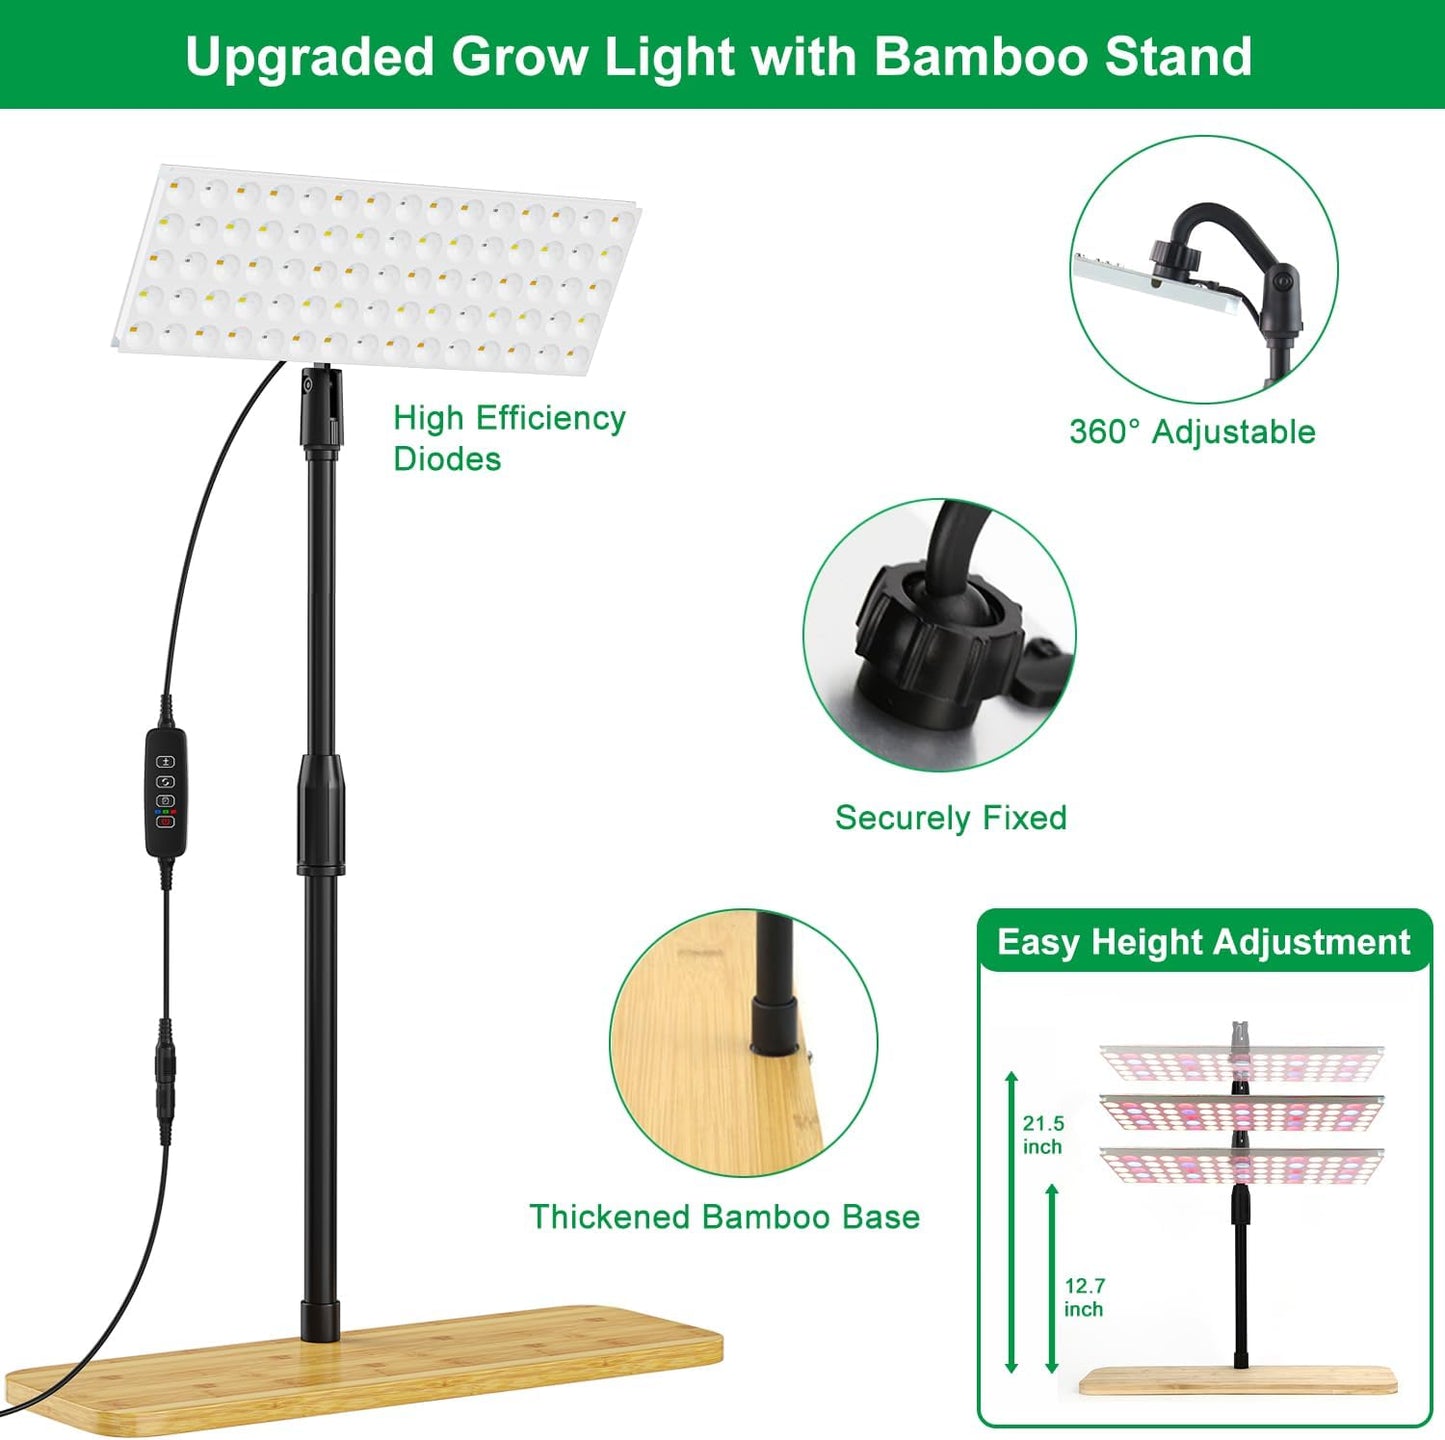 FANHAO Grow Light with Stand, Full Spectrum LED Plant Light for Indoor Plants